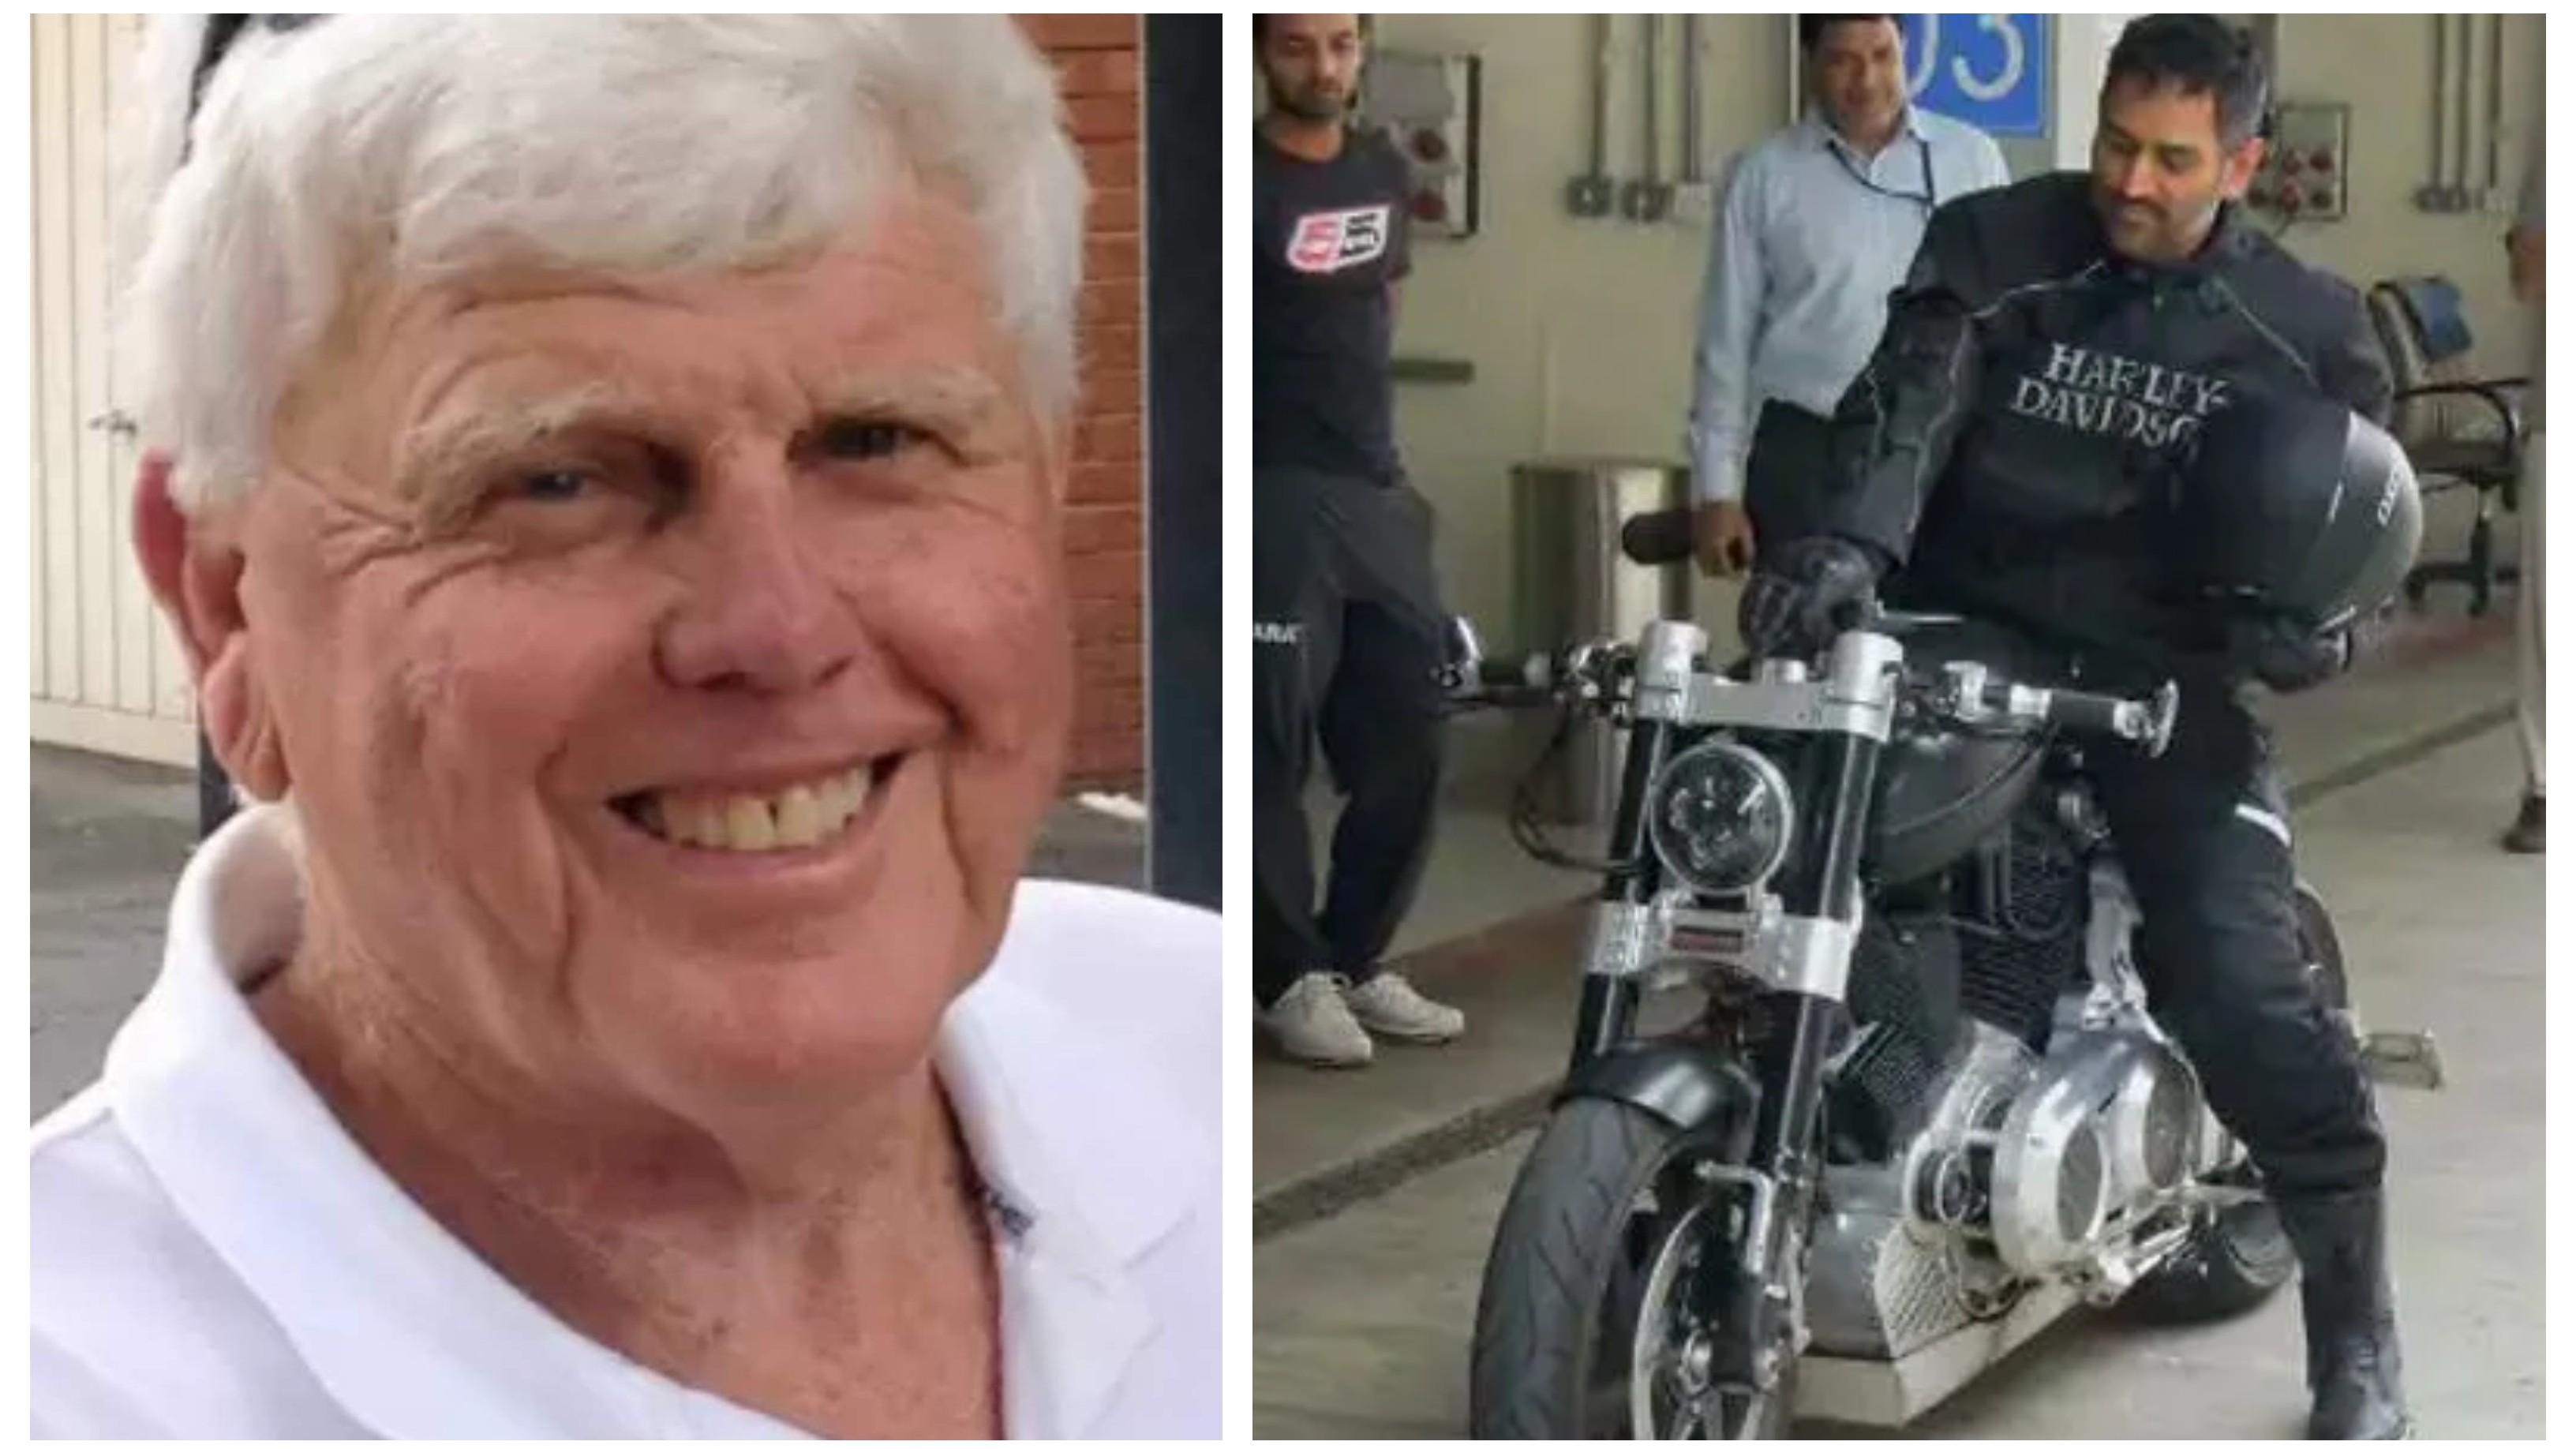 Barry Richards impressed with MS Dhoni’s bike collection, wants to have a ride on his Harley Davidson